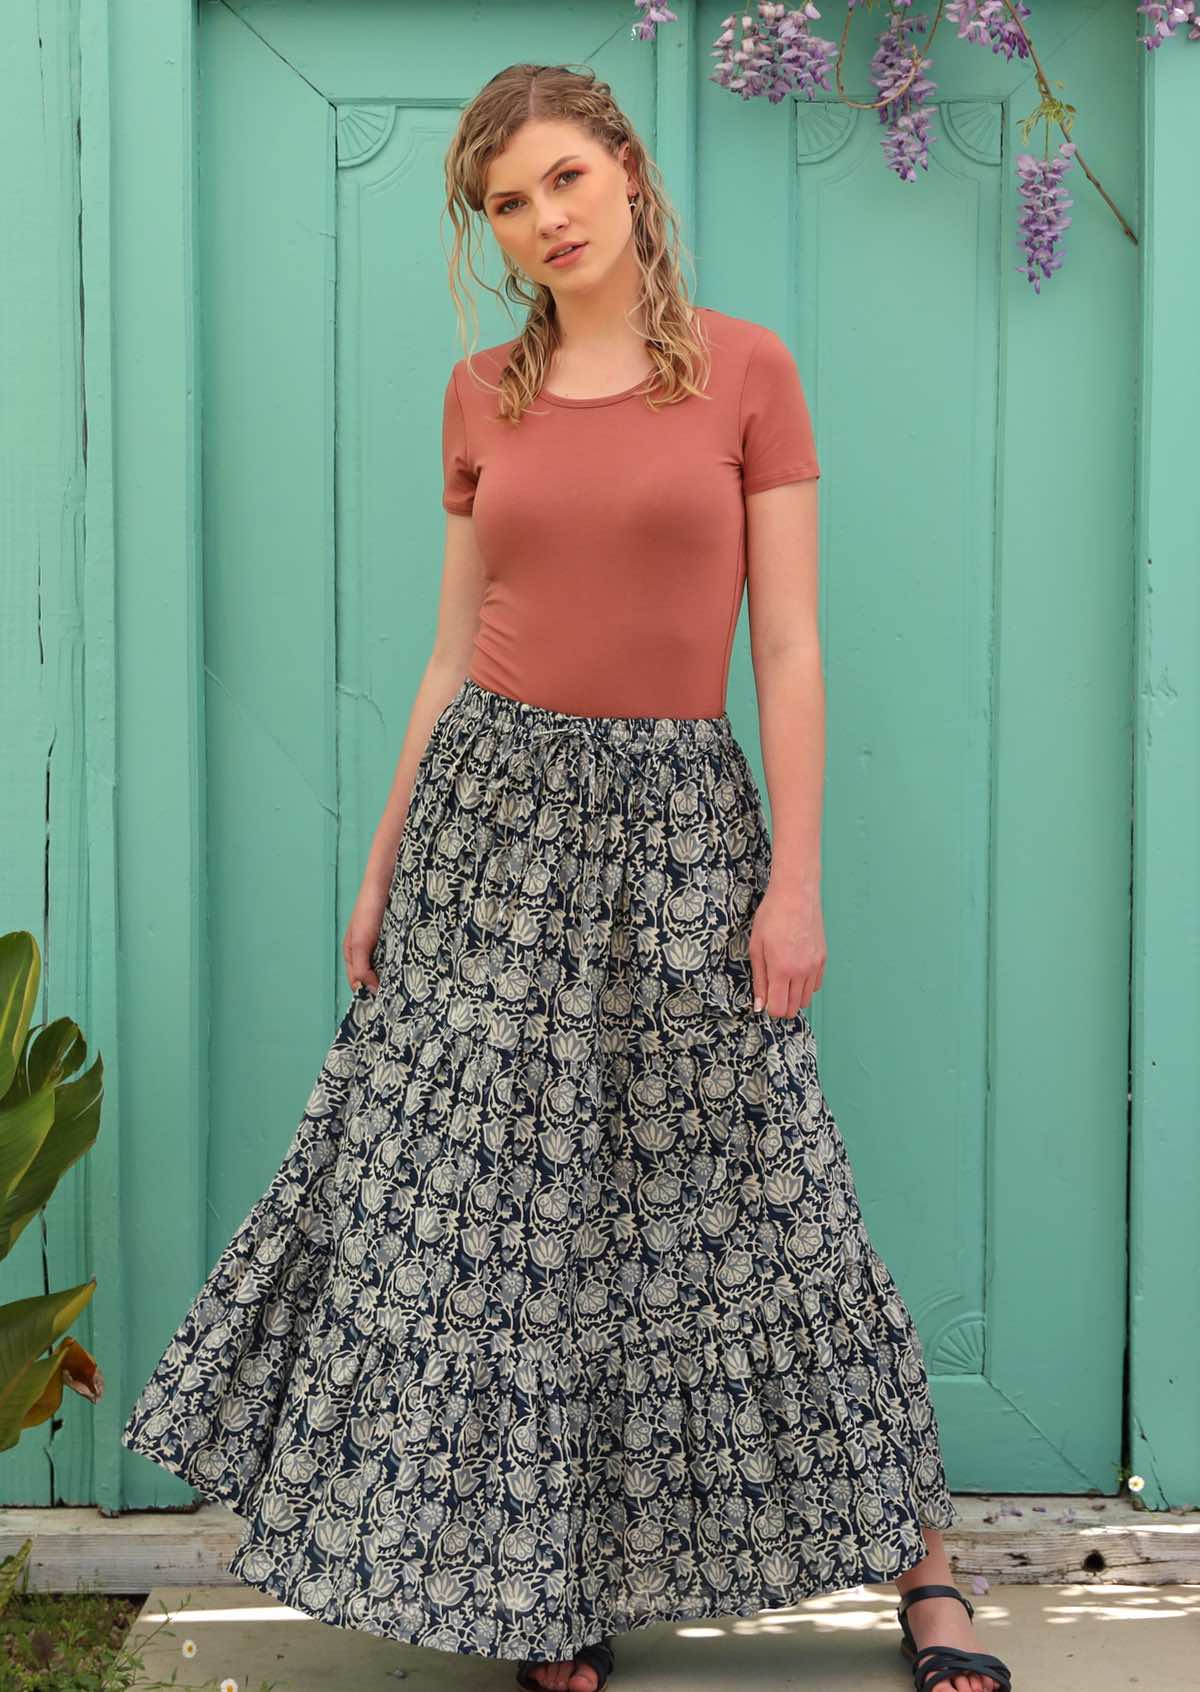 Details more than 206 blue floral maxi skirt latest